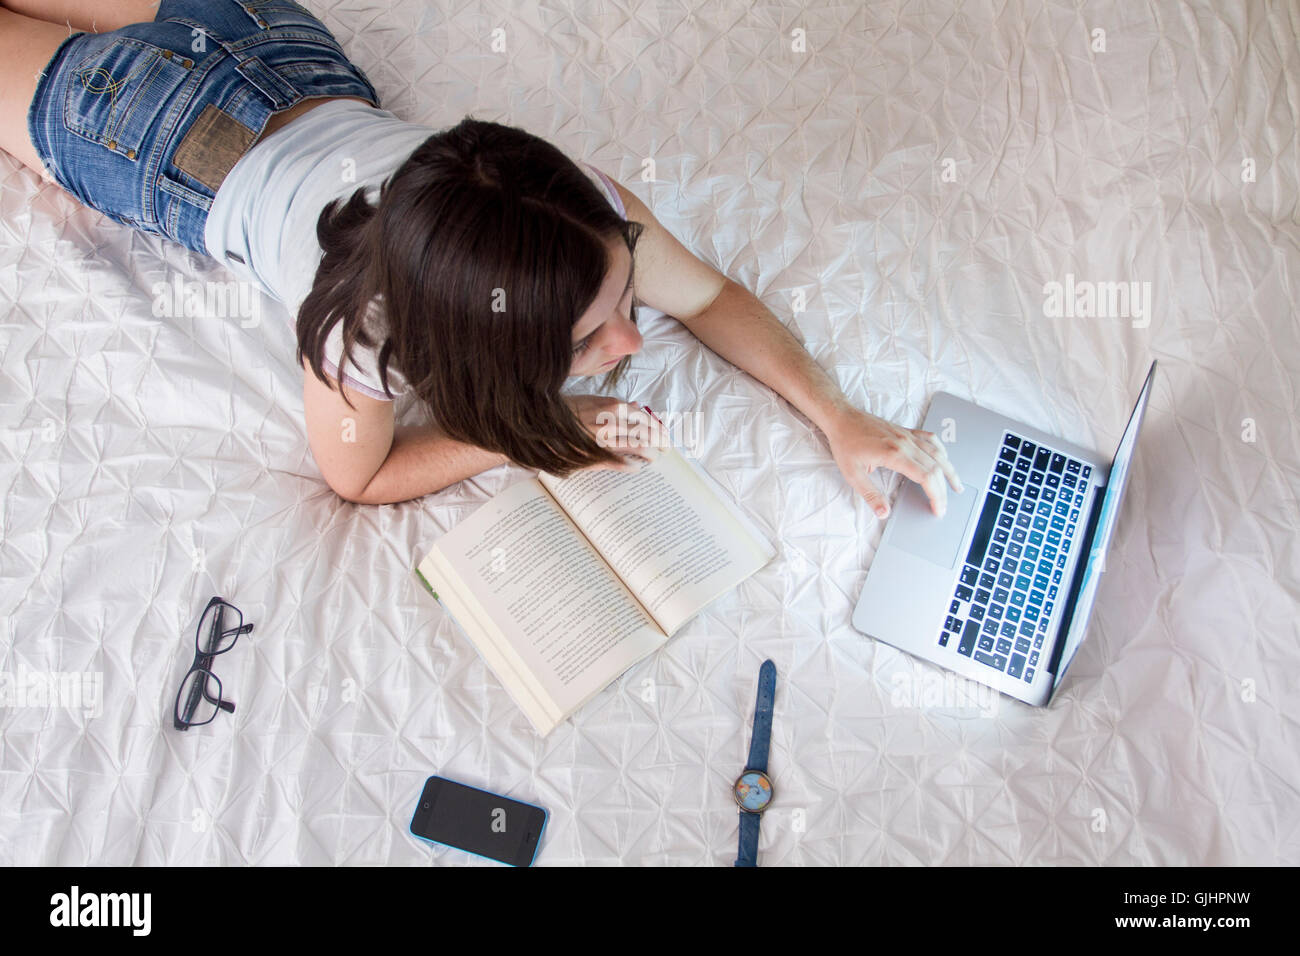 Girl reading a book and surfing the net Stock Photo